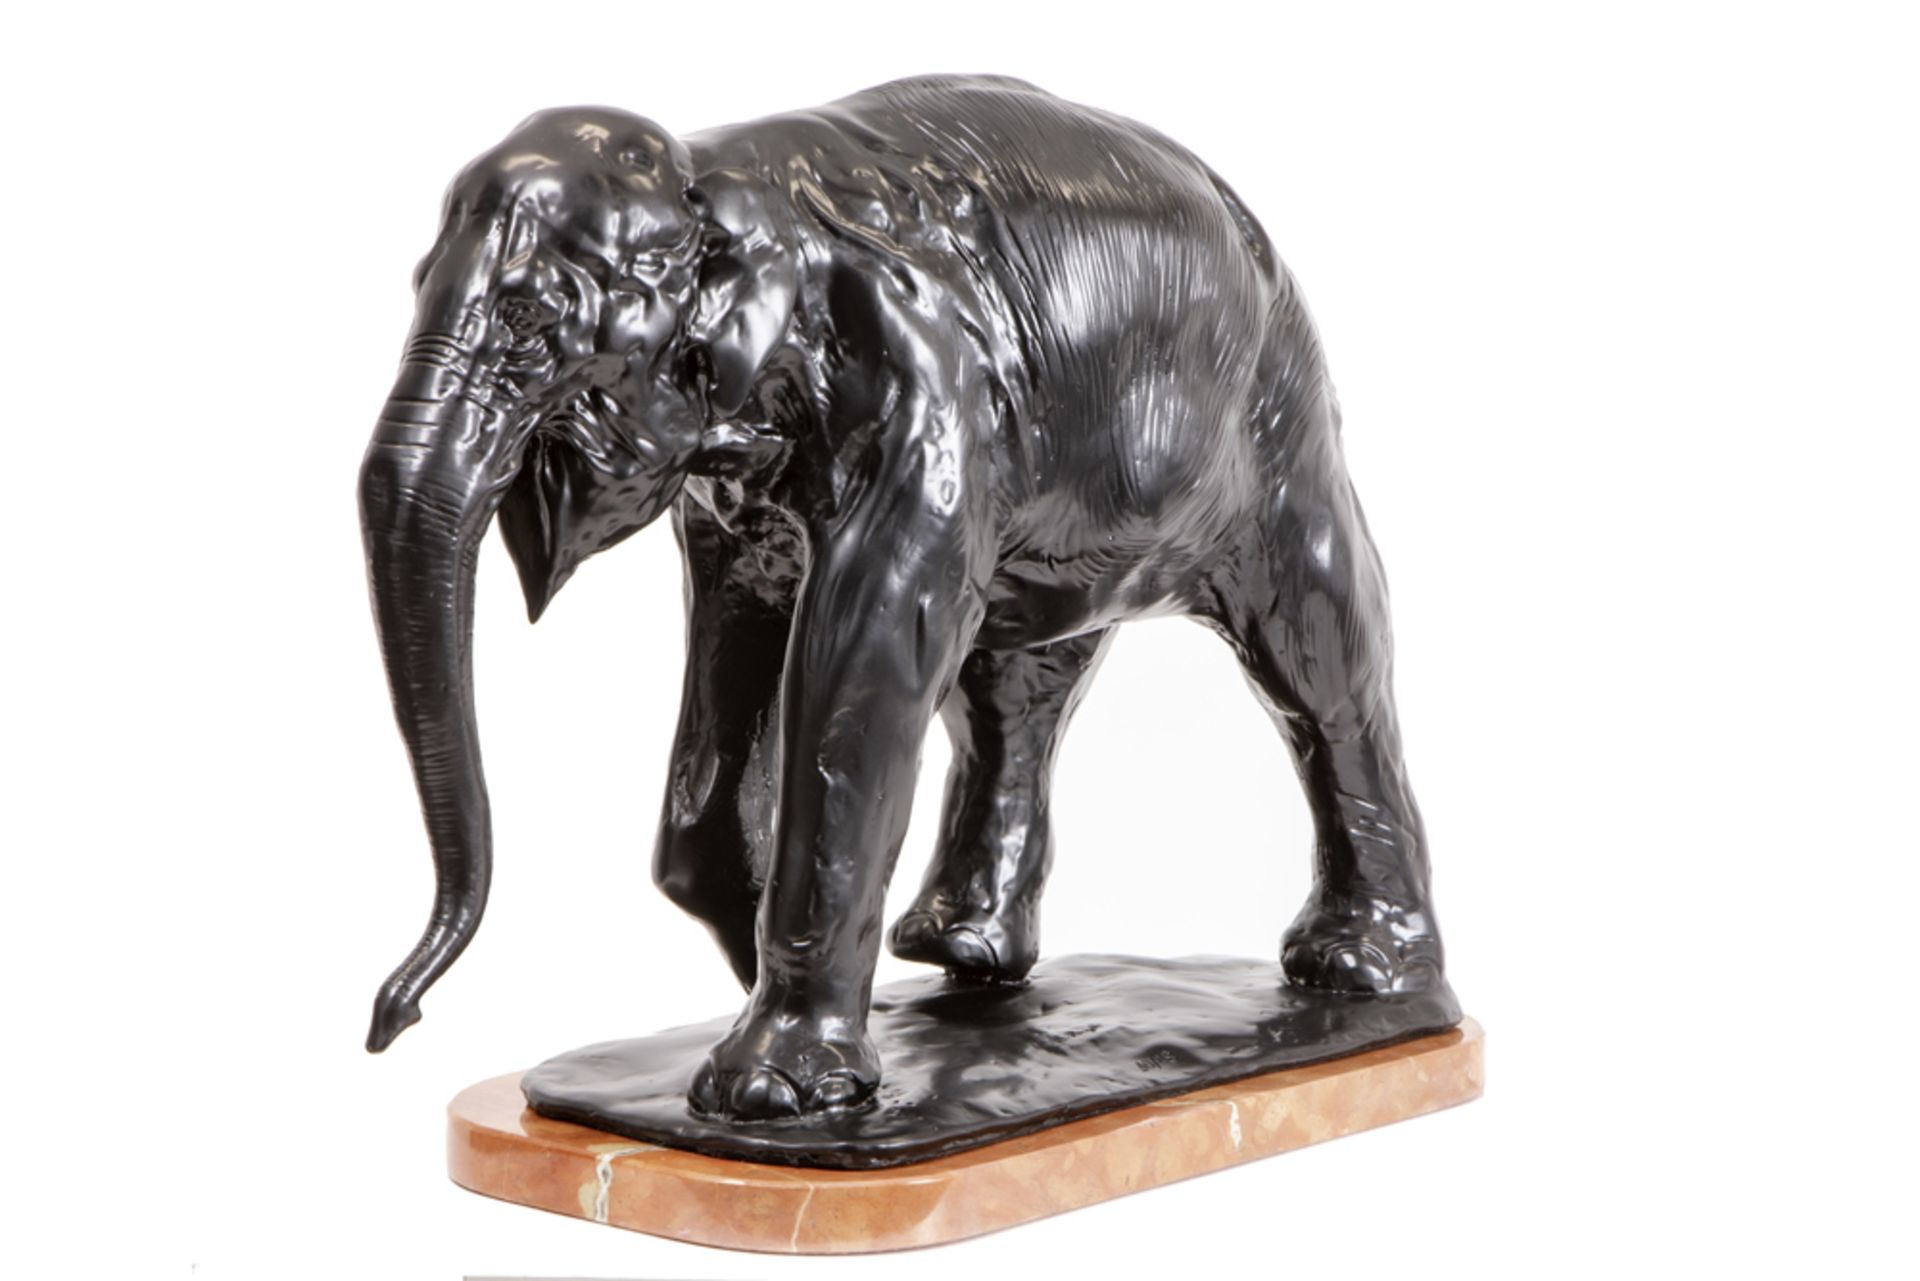 Rembrandt Bugatti "Walking Elephant" sculpture in bronze - signed posthumous cast by Ebano - with - Bild 3 aus 4